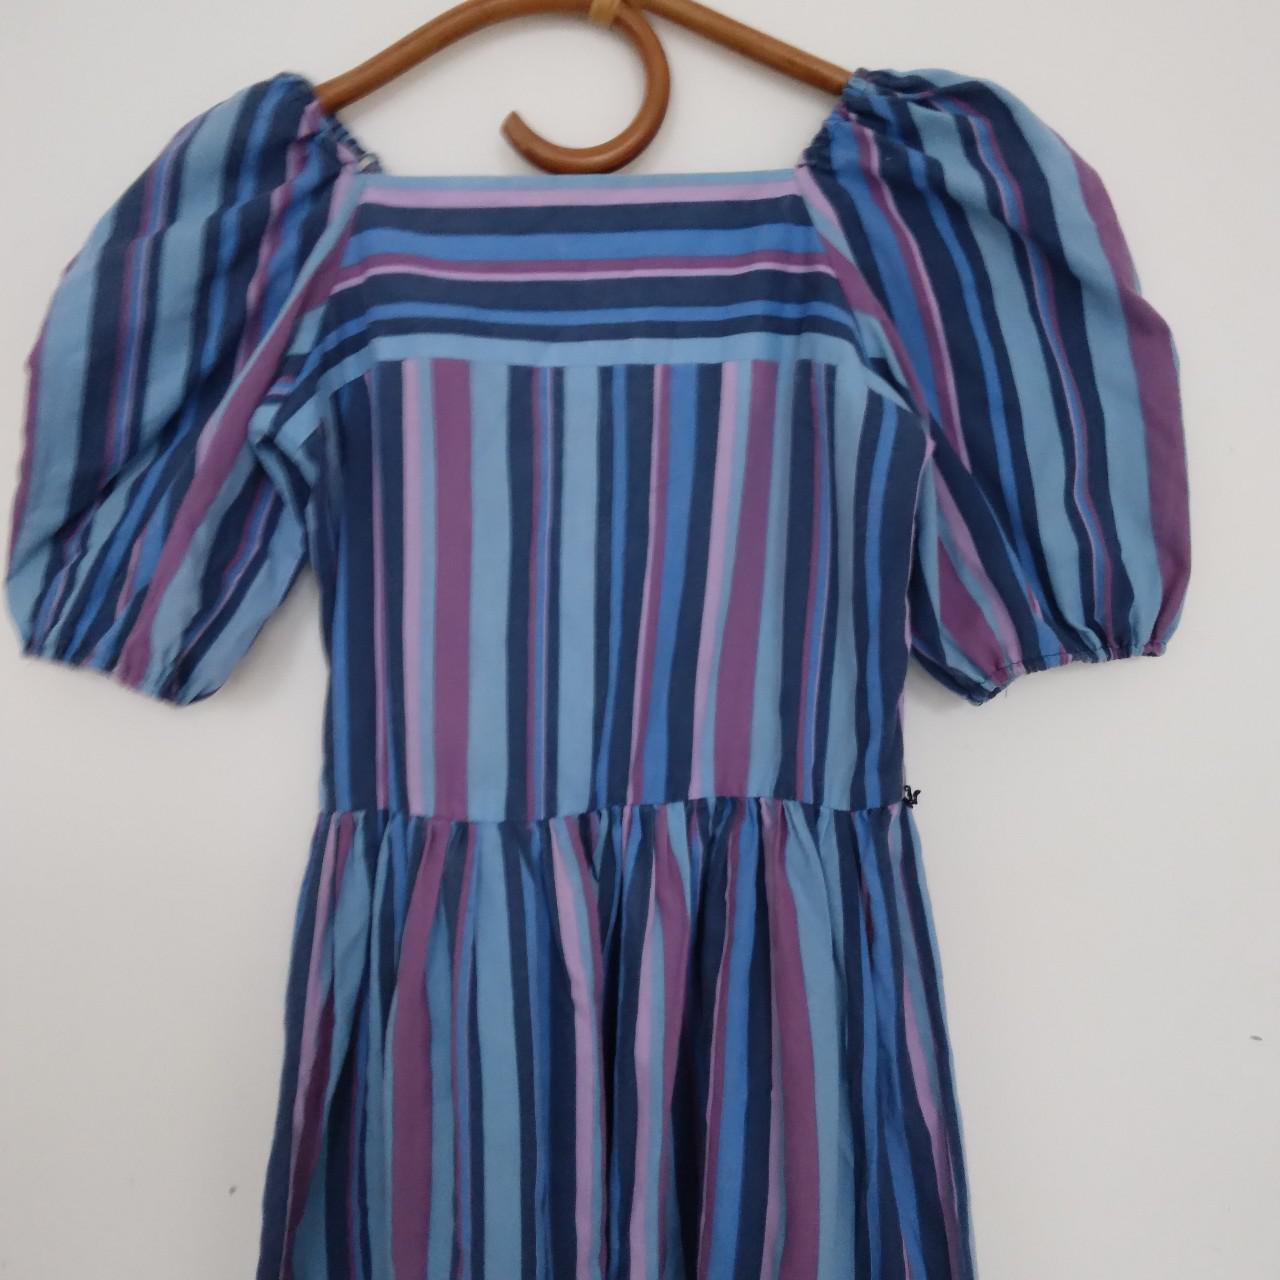 Product Image 4 - Vintage Striped Dress with square